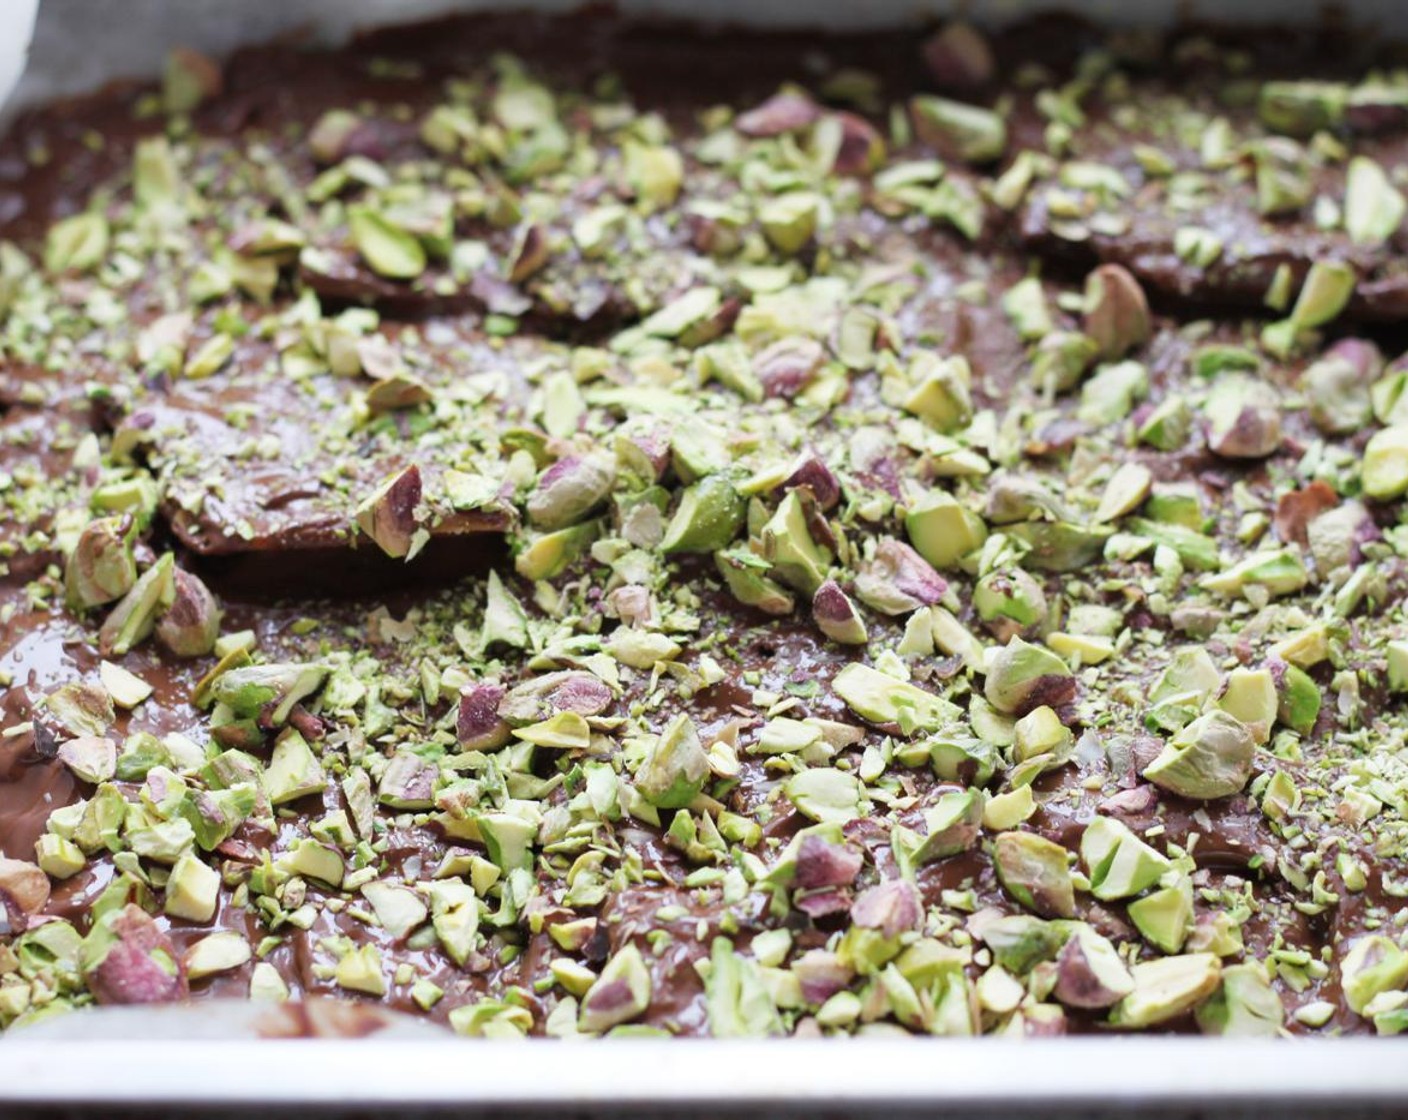 step 10 Evenly sprinkle over chopped pistachios. Place in the refrigerator to set, about 20 minutes.